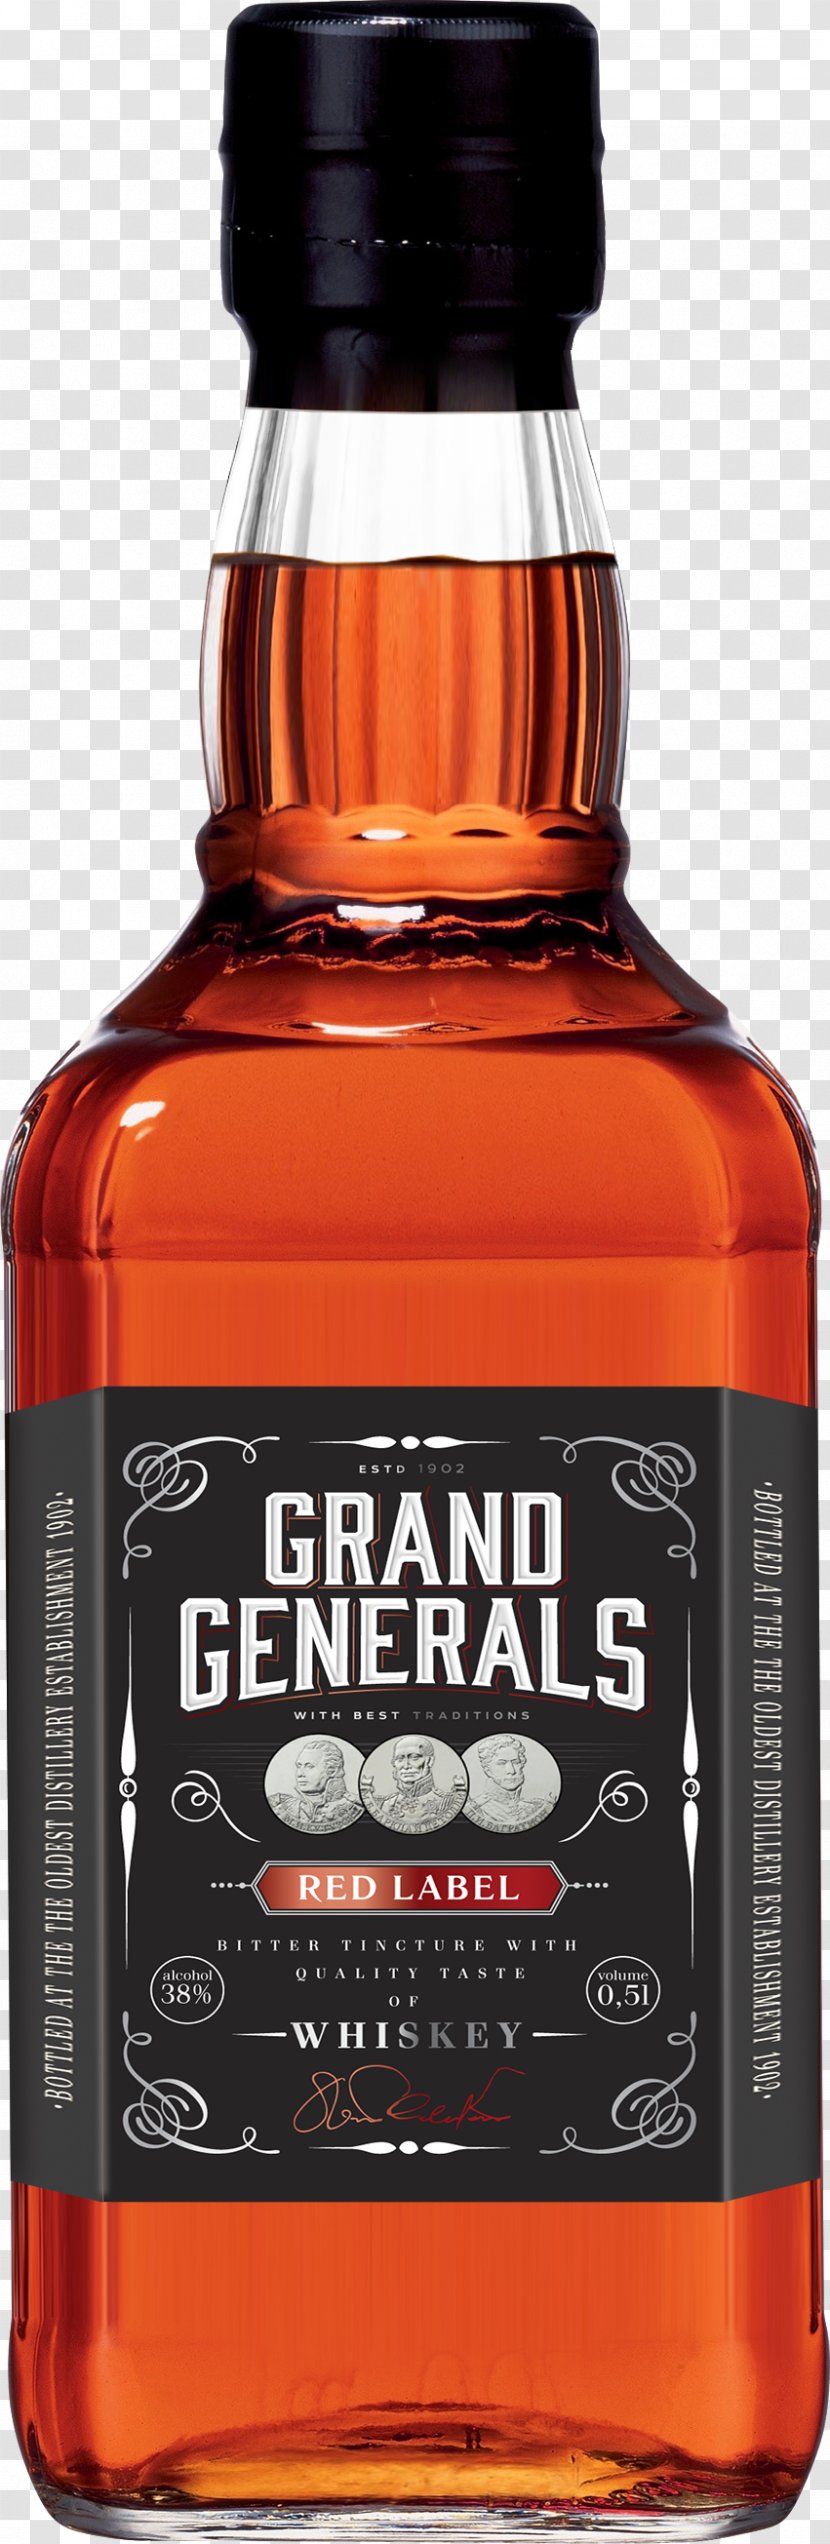 Tennessee Whiskey Liqueur Command & Conquer: Generals Distilled Beverage - Whisky - Wine Transparent PNG